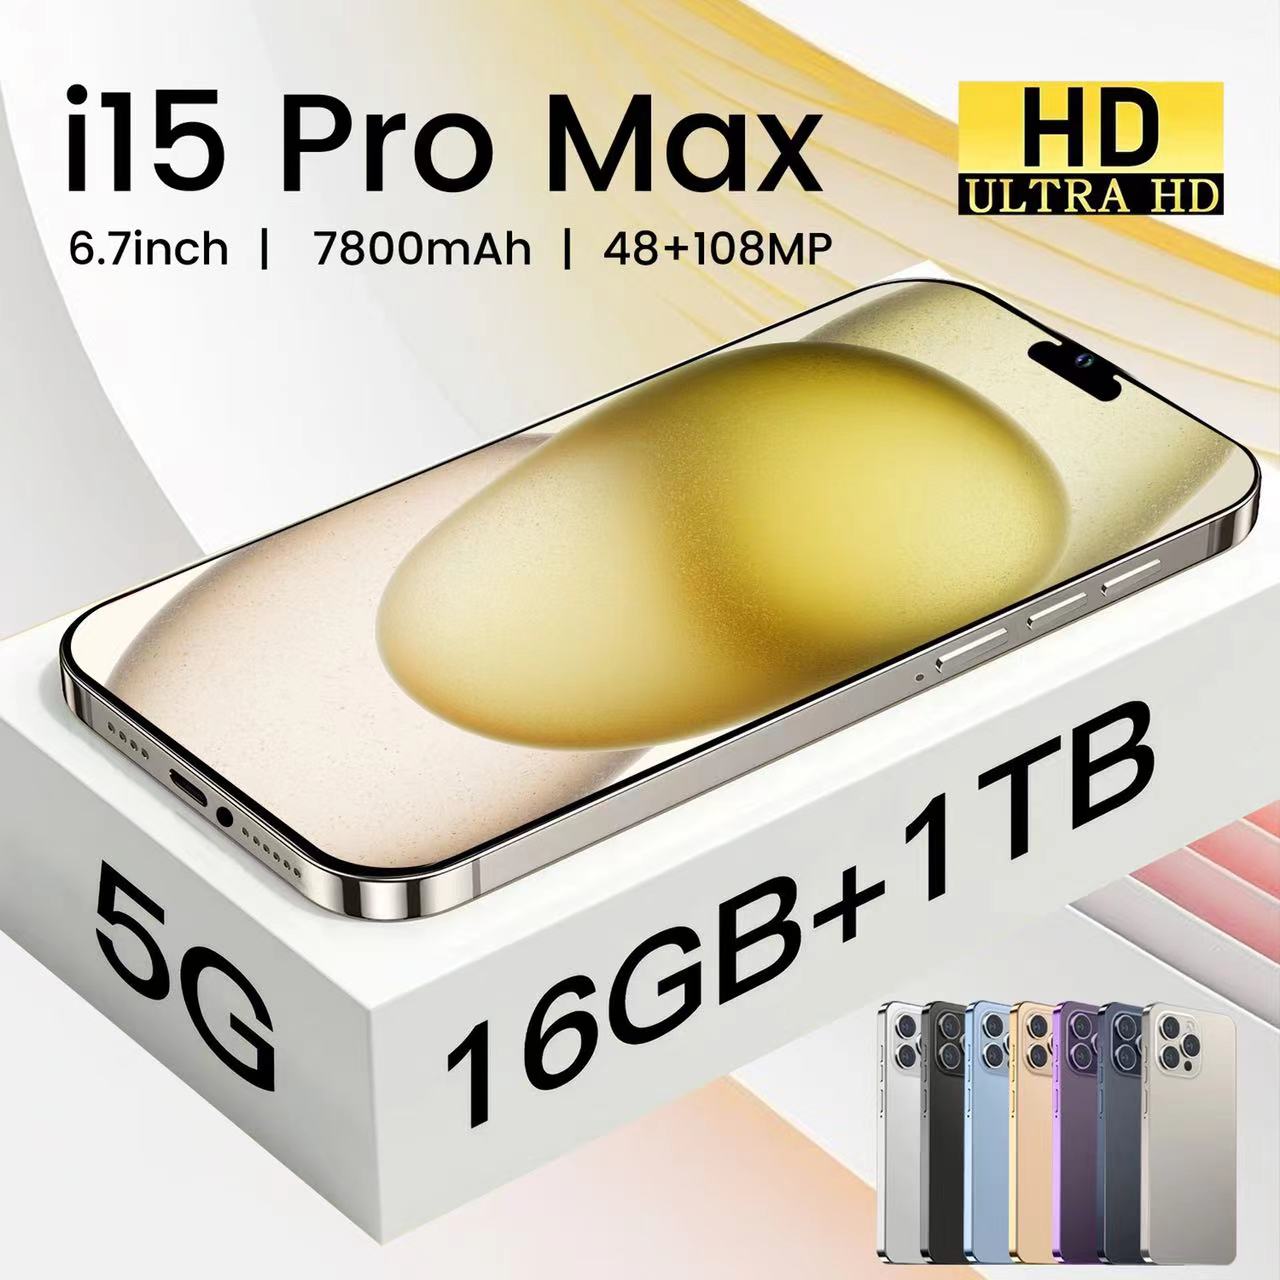 i15 pro max telephone smartphone 6.7 inch smartphone 4G LTE smartphones 16GB RAM 1TB Camera 48MP 108MP Face ID GPS Octa Core android mobile not iPhone androids phone